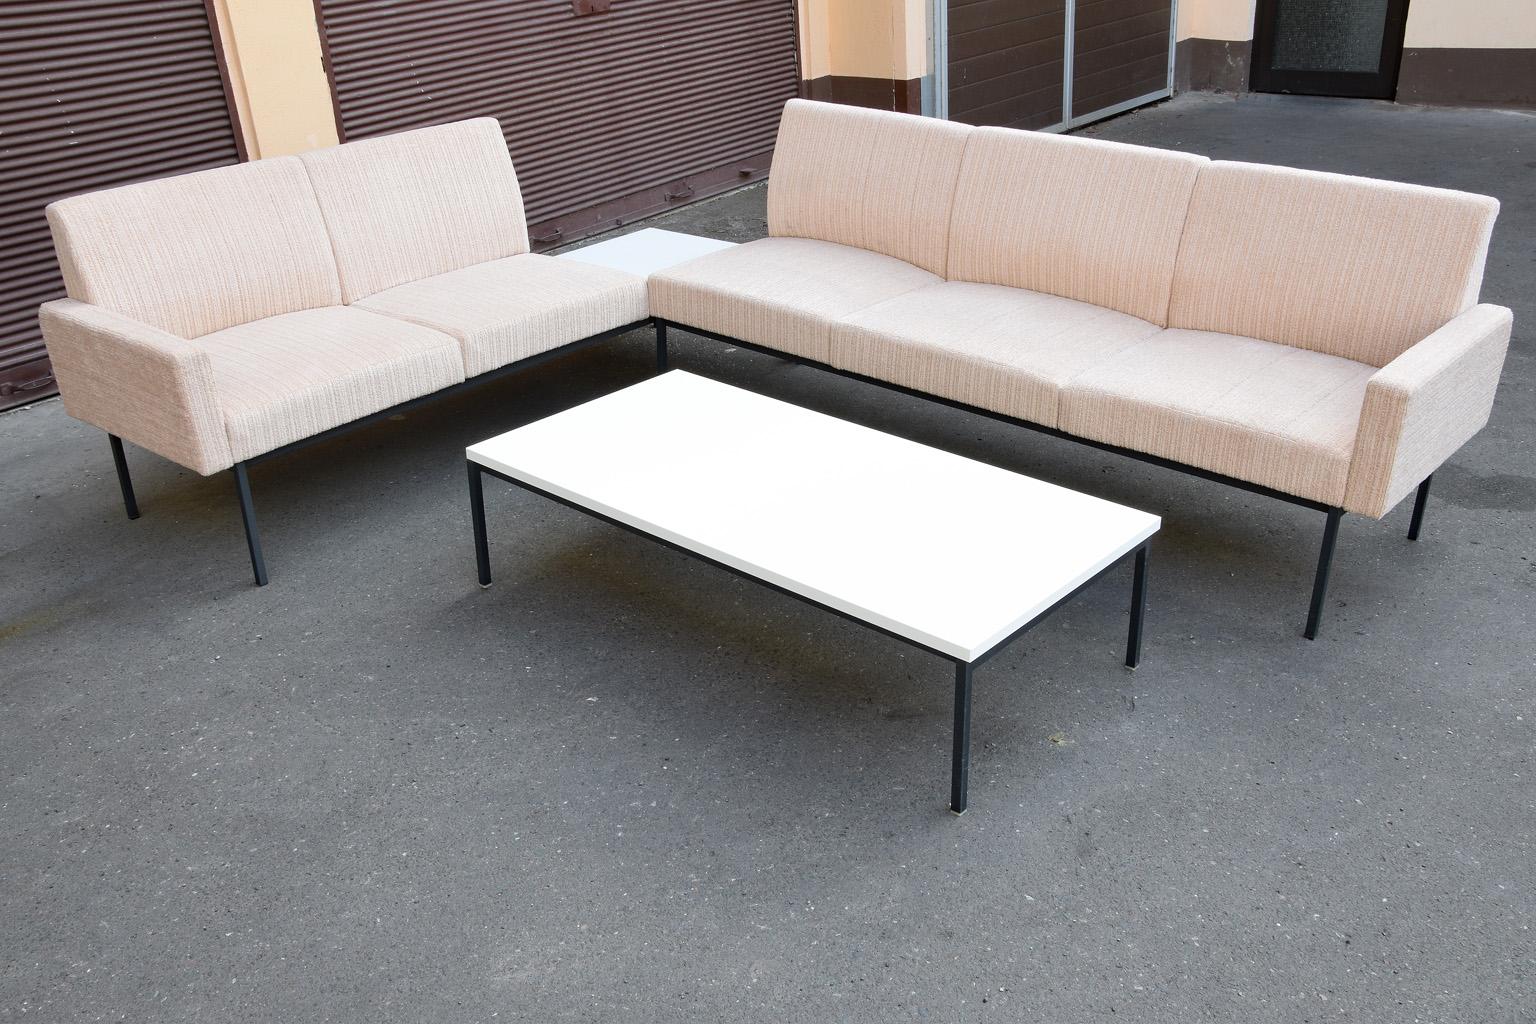 Modular Seating Group from Thonet, 1960s, Seating Elements, Lobby Sofa Beige In Good Condition For Sale In Nürnberg, Bavaria